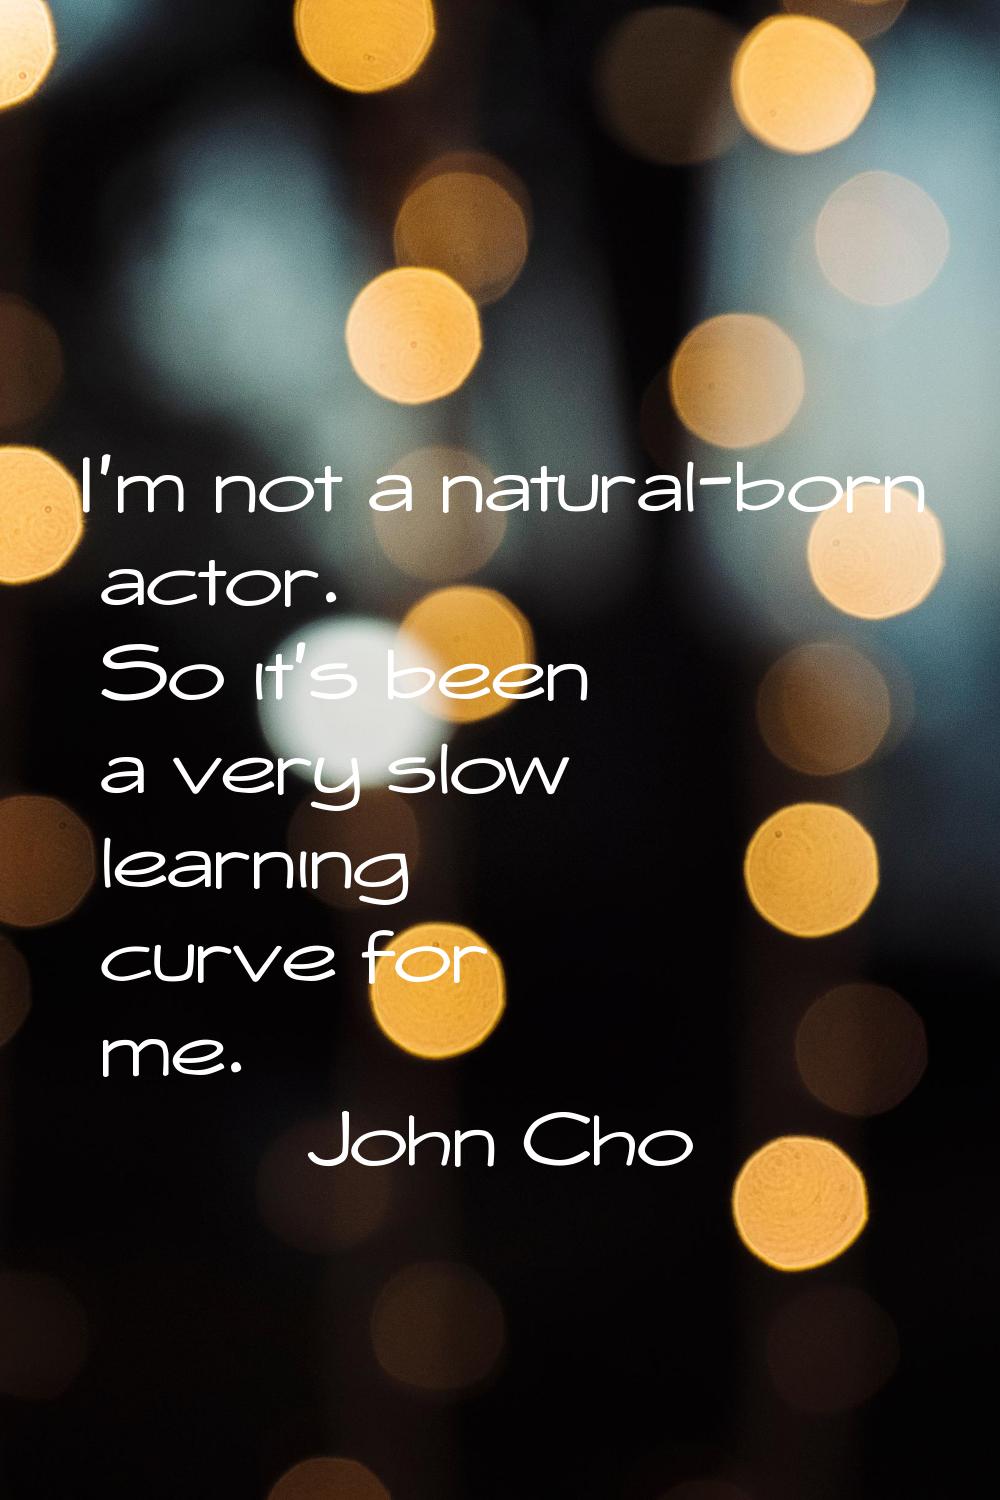 I'm not a natural-born actor. So it's been a very slow learning curve for me.